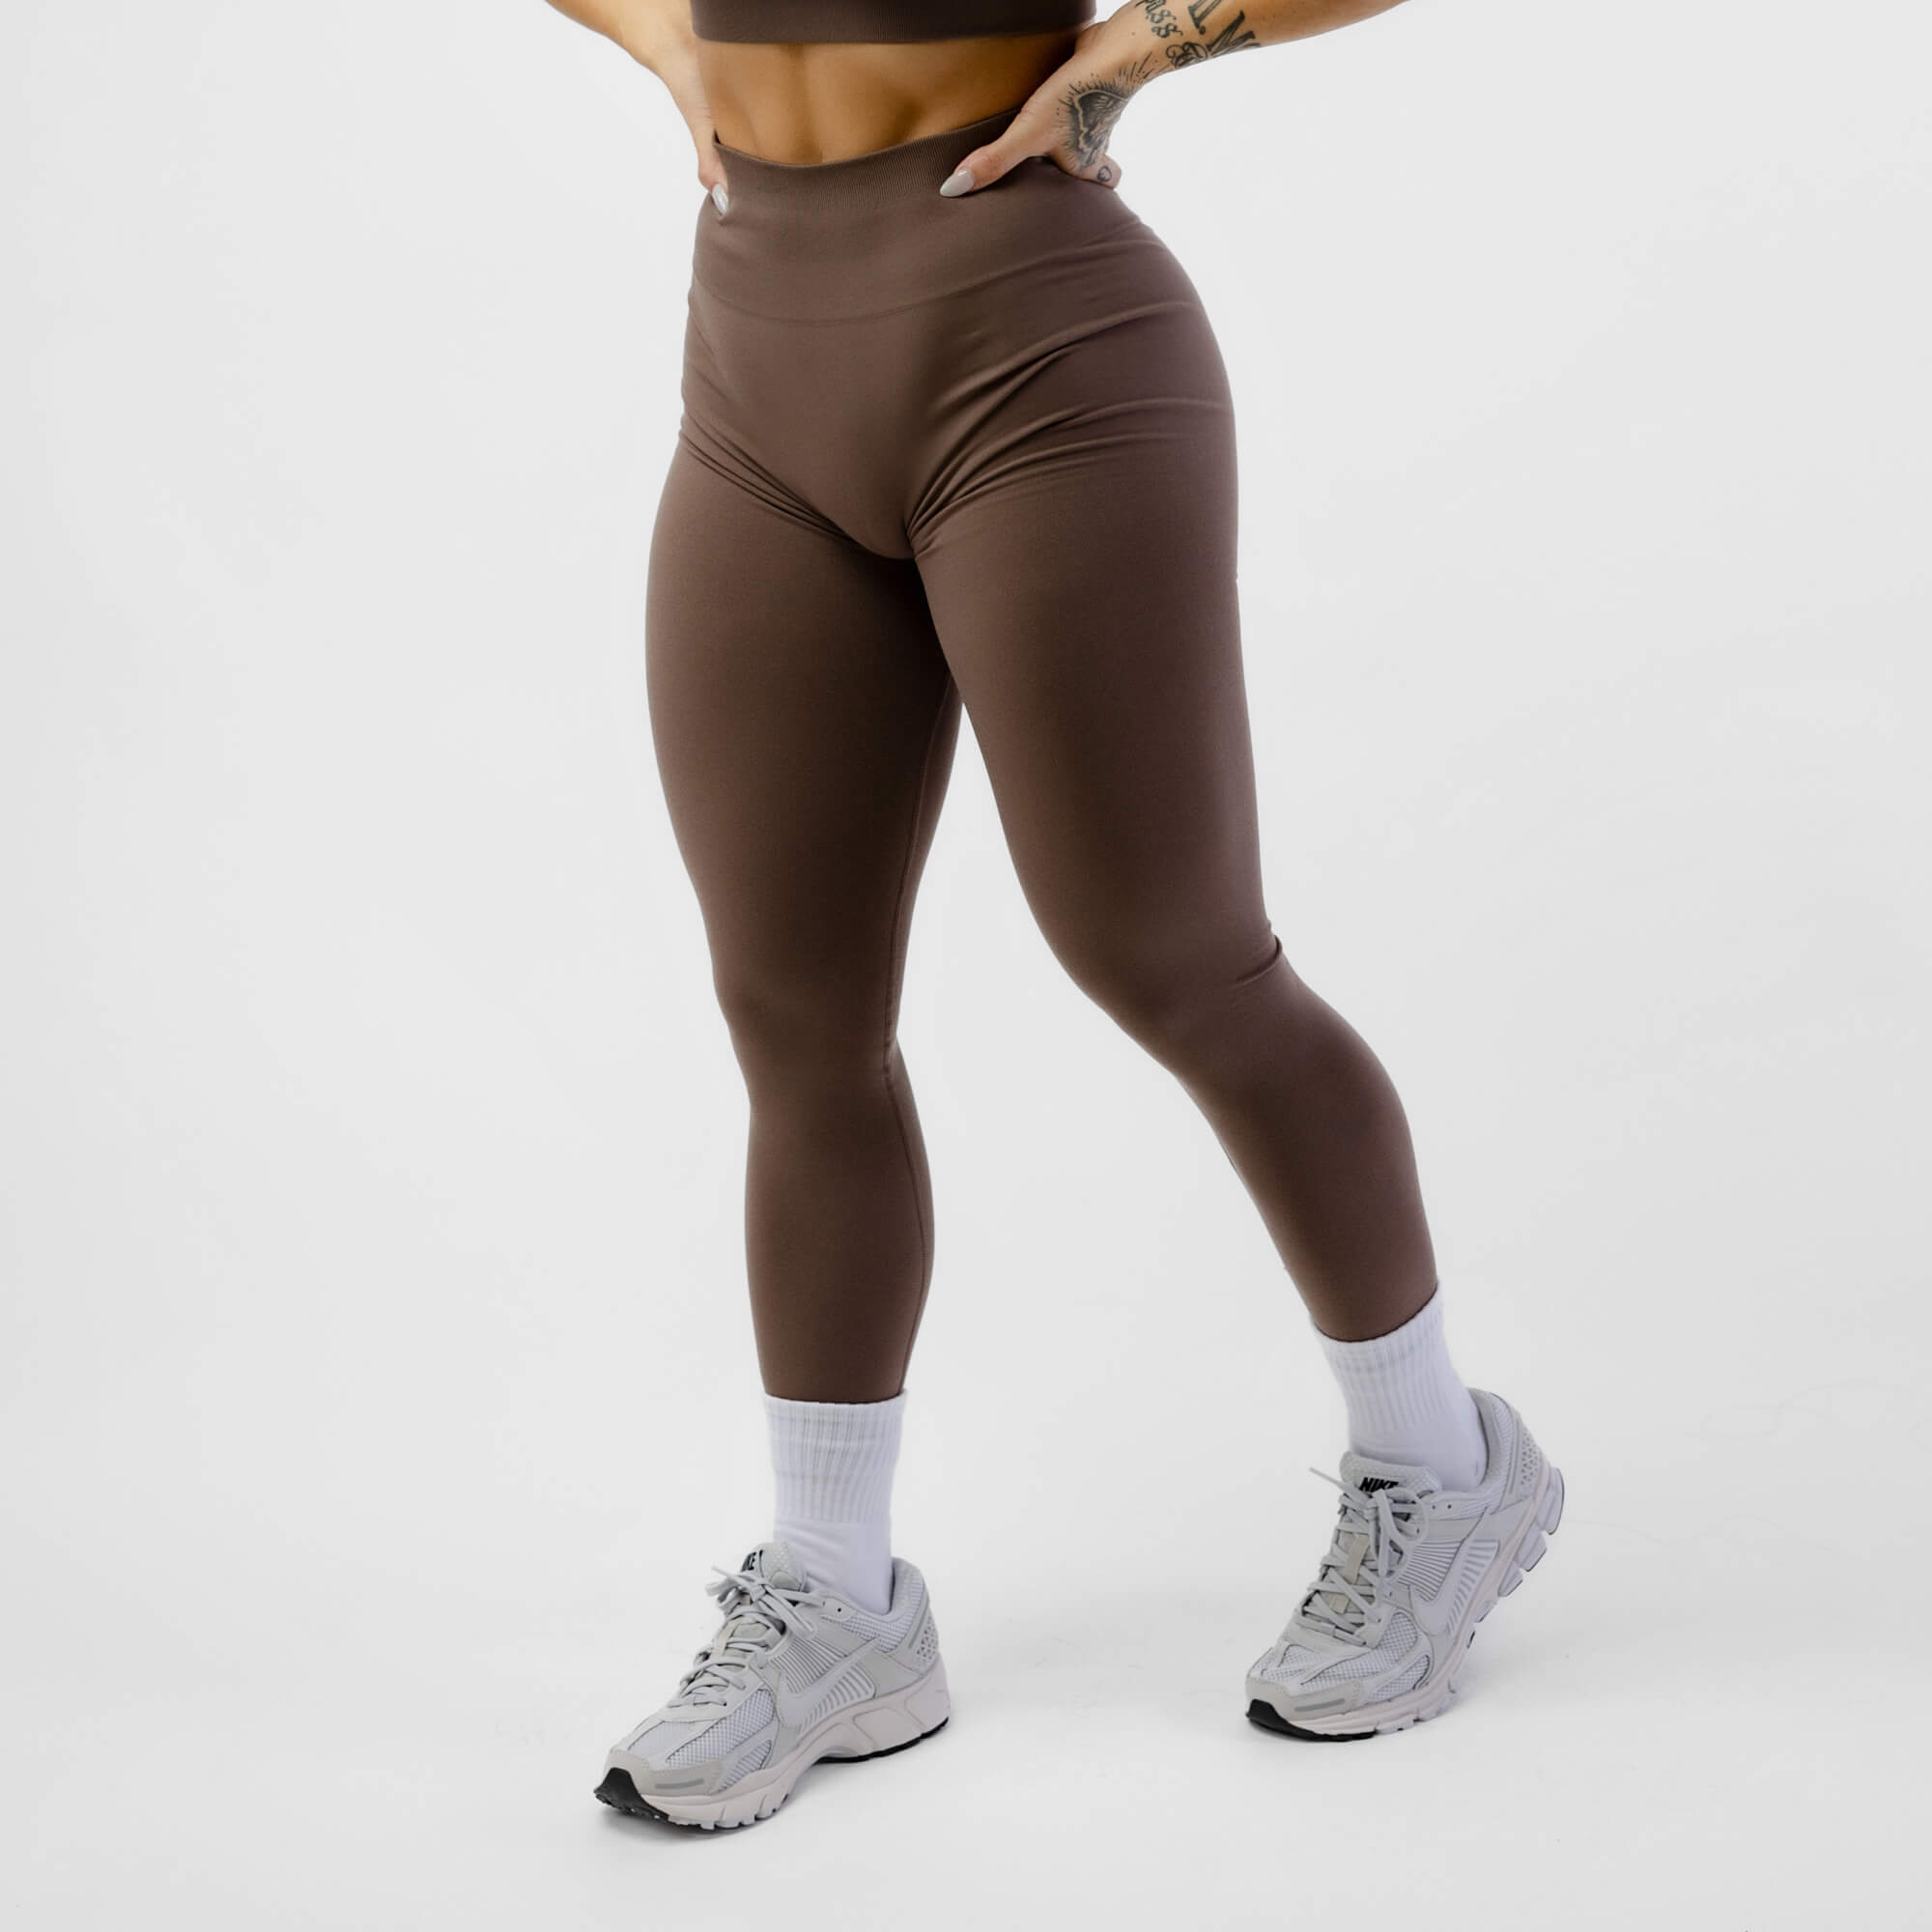 Legacy Tight  Leggings fashion, Tights, Workout clothes